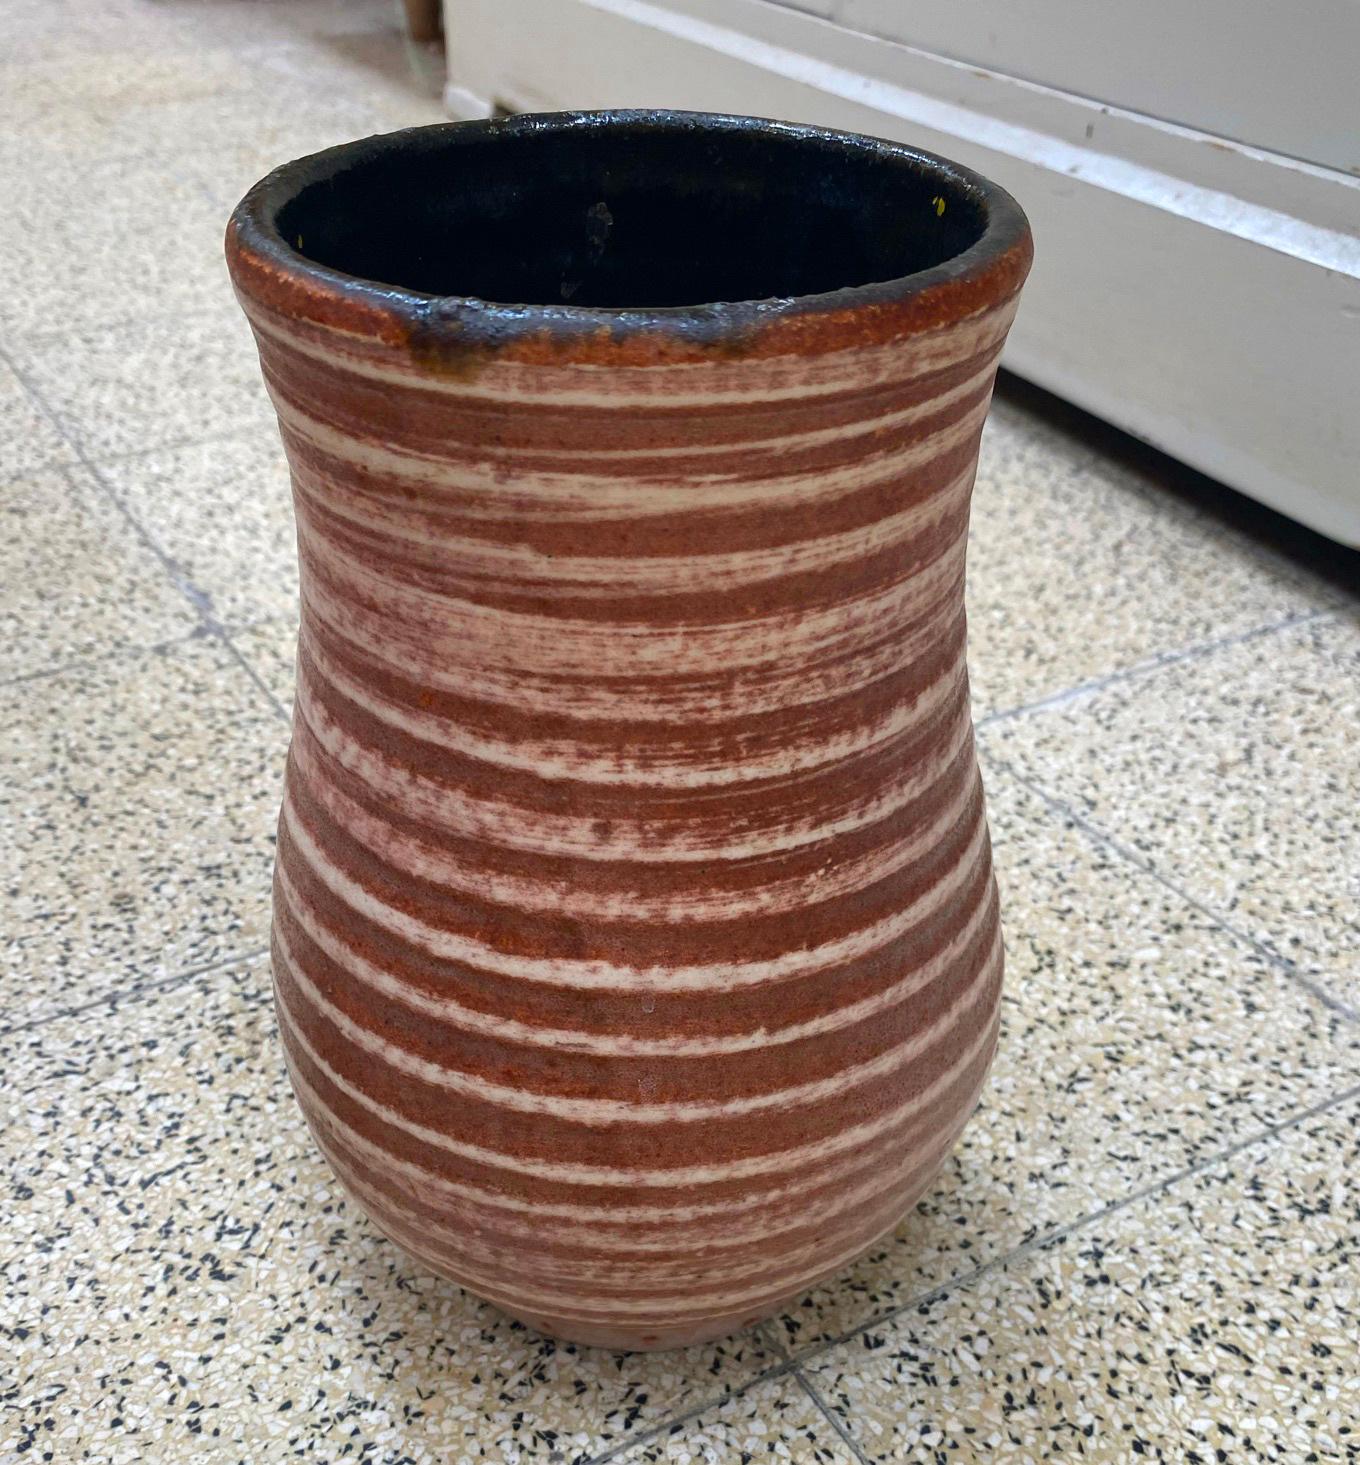 Accolay vase, circa 1960
the color is pink / brown.